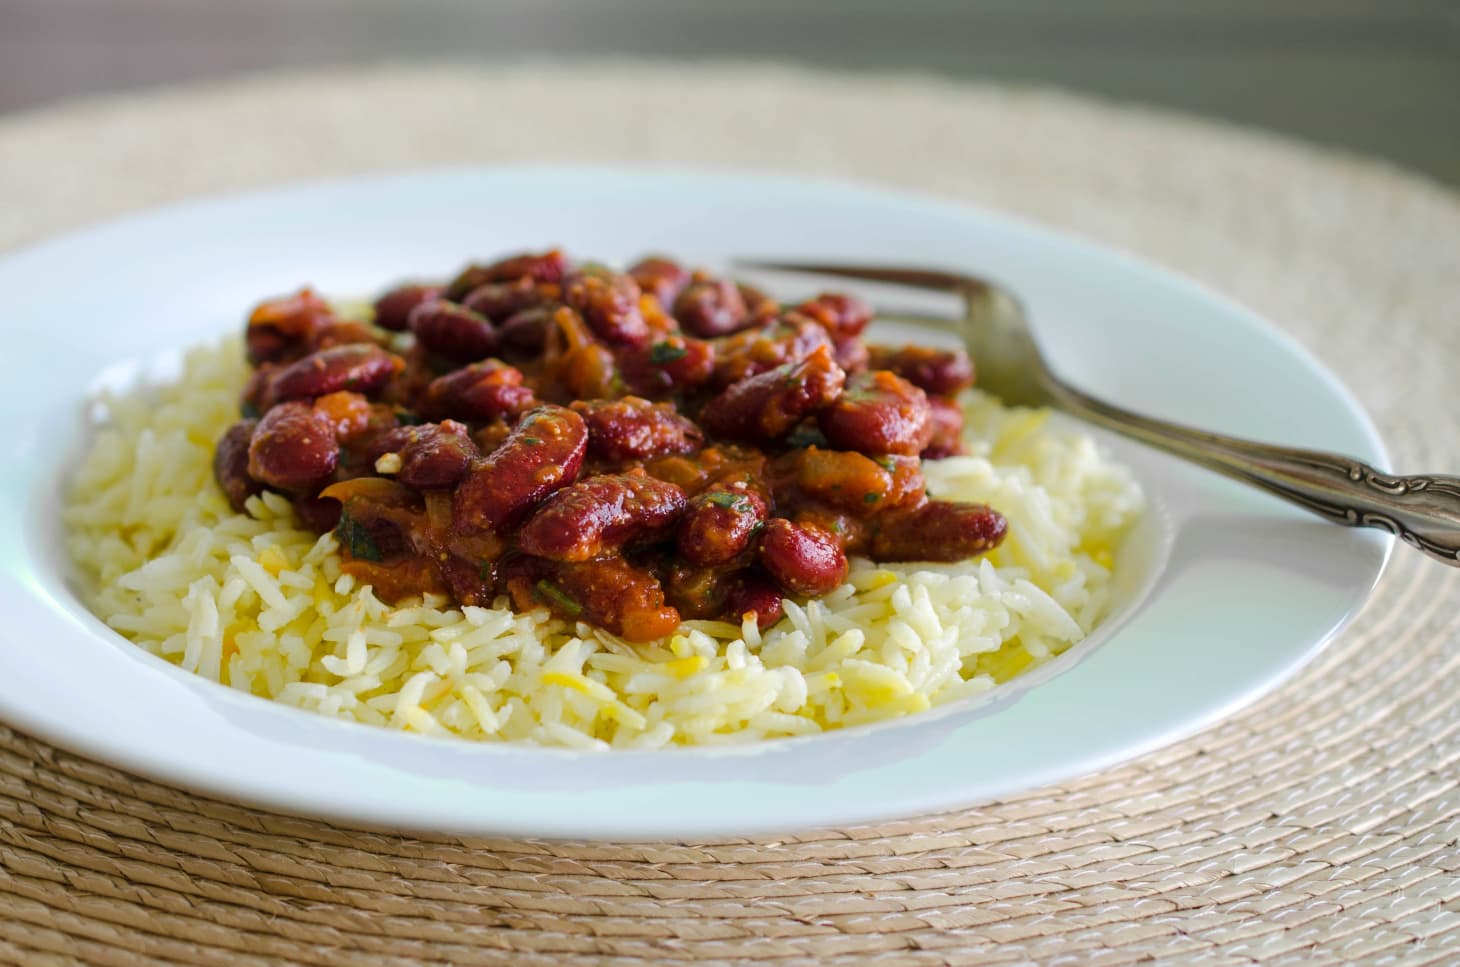 Recipe: Red Kidney Bean Curry with Rice (Rajmah Chawal) | Kitchn